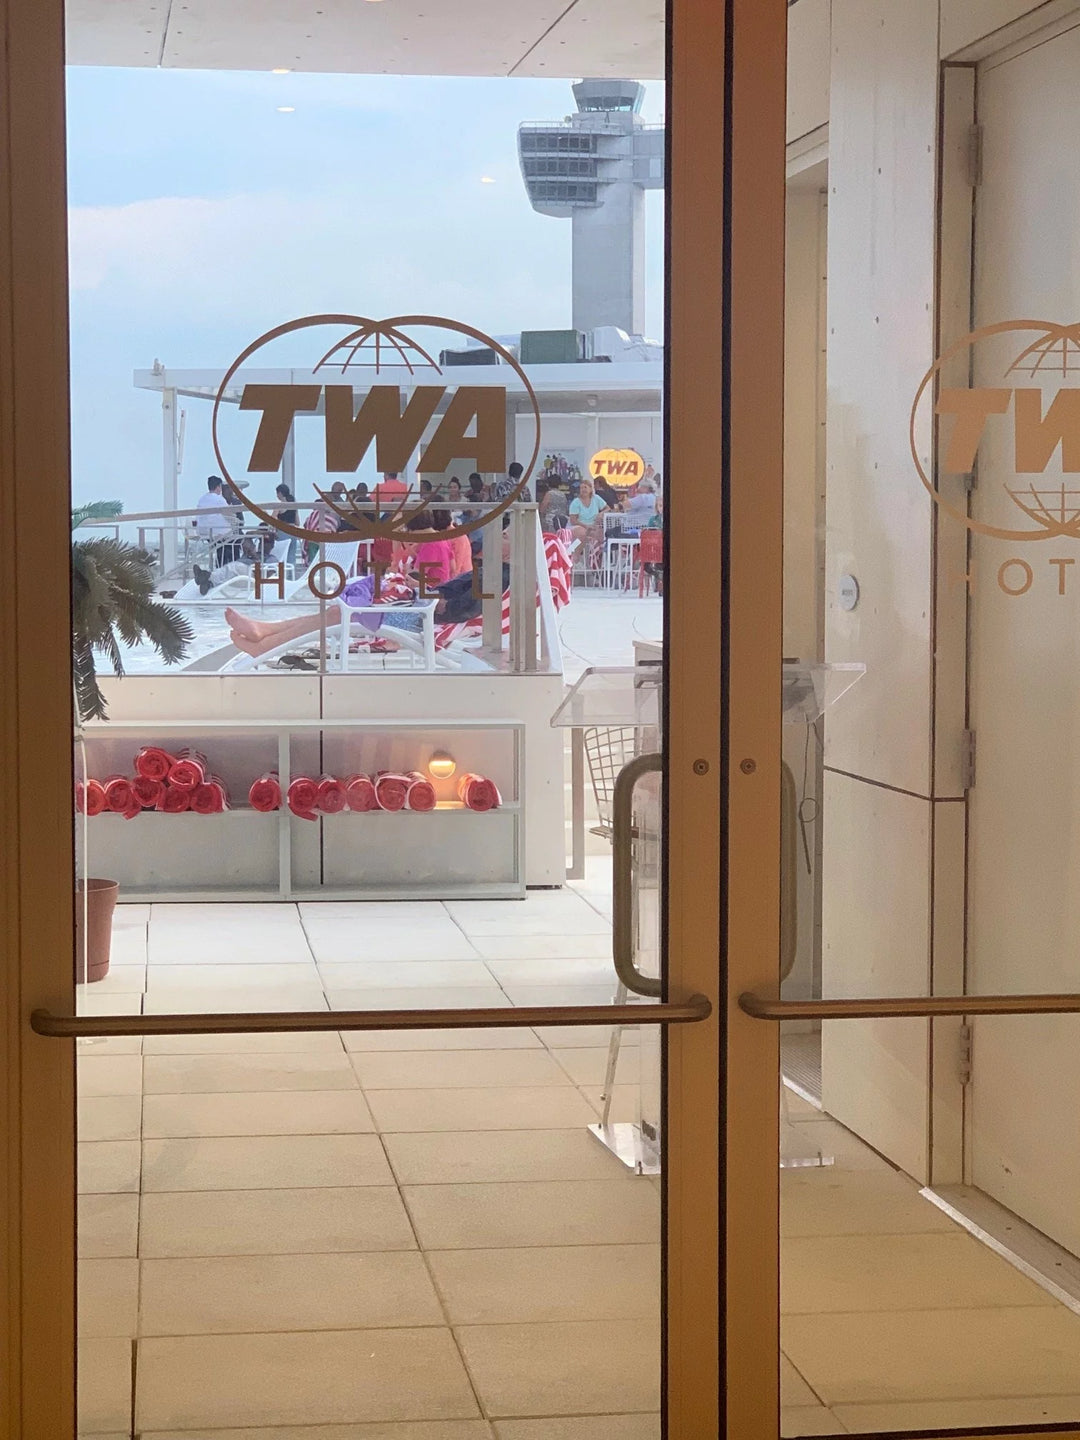 Staycation at the TWA Hotel